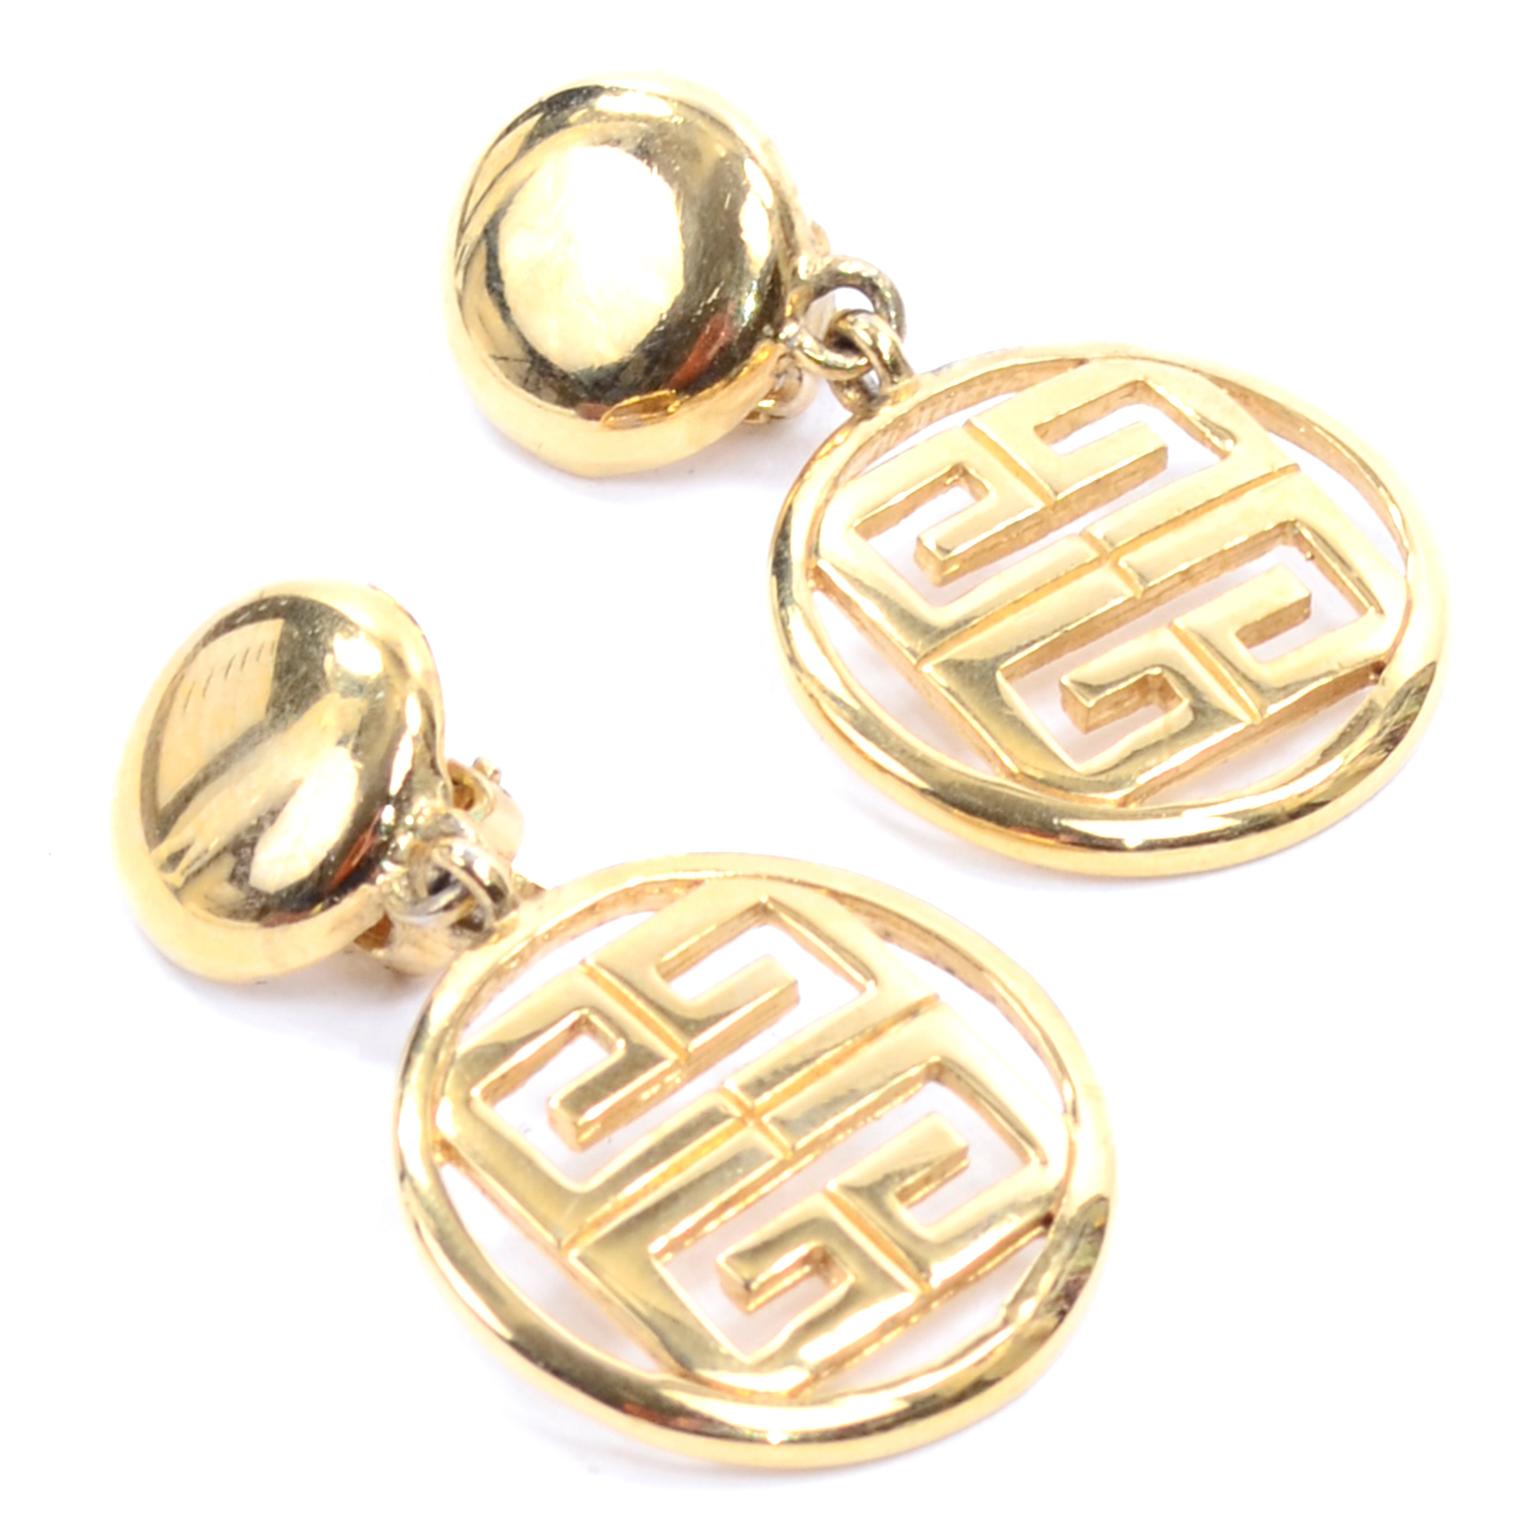 Beautiful gold tone Givenchy logo clip on dangle drop earrings. These great designer earrings  have a solid circular piece that clips to the ear, with a drop circle containing the cutout Givenchy logo. They are marked 